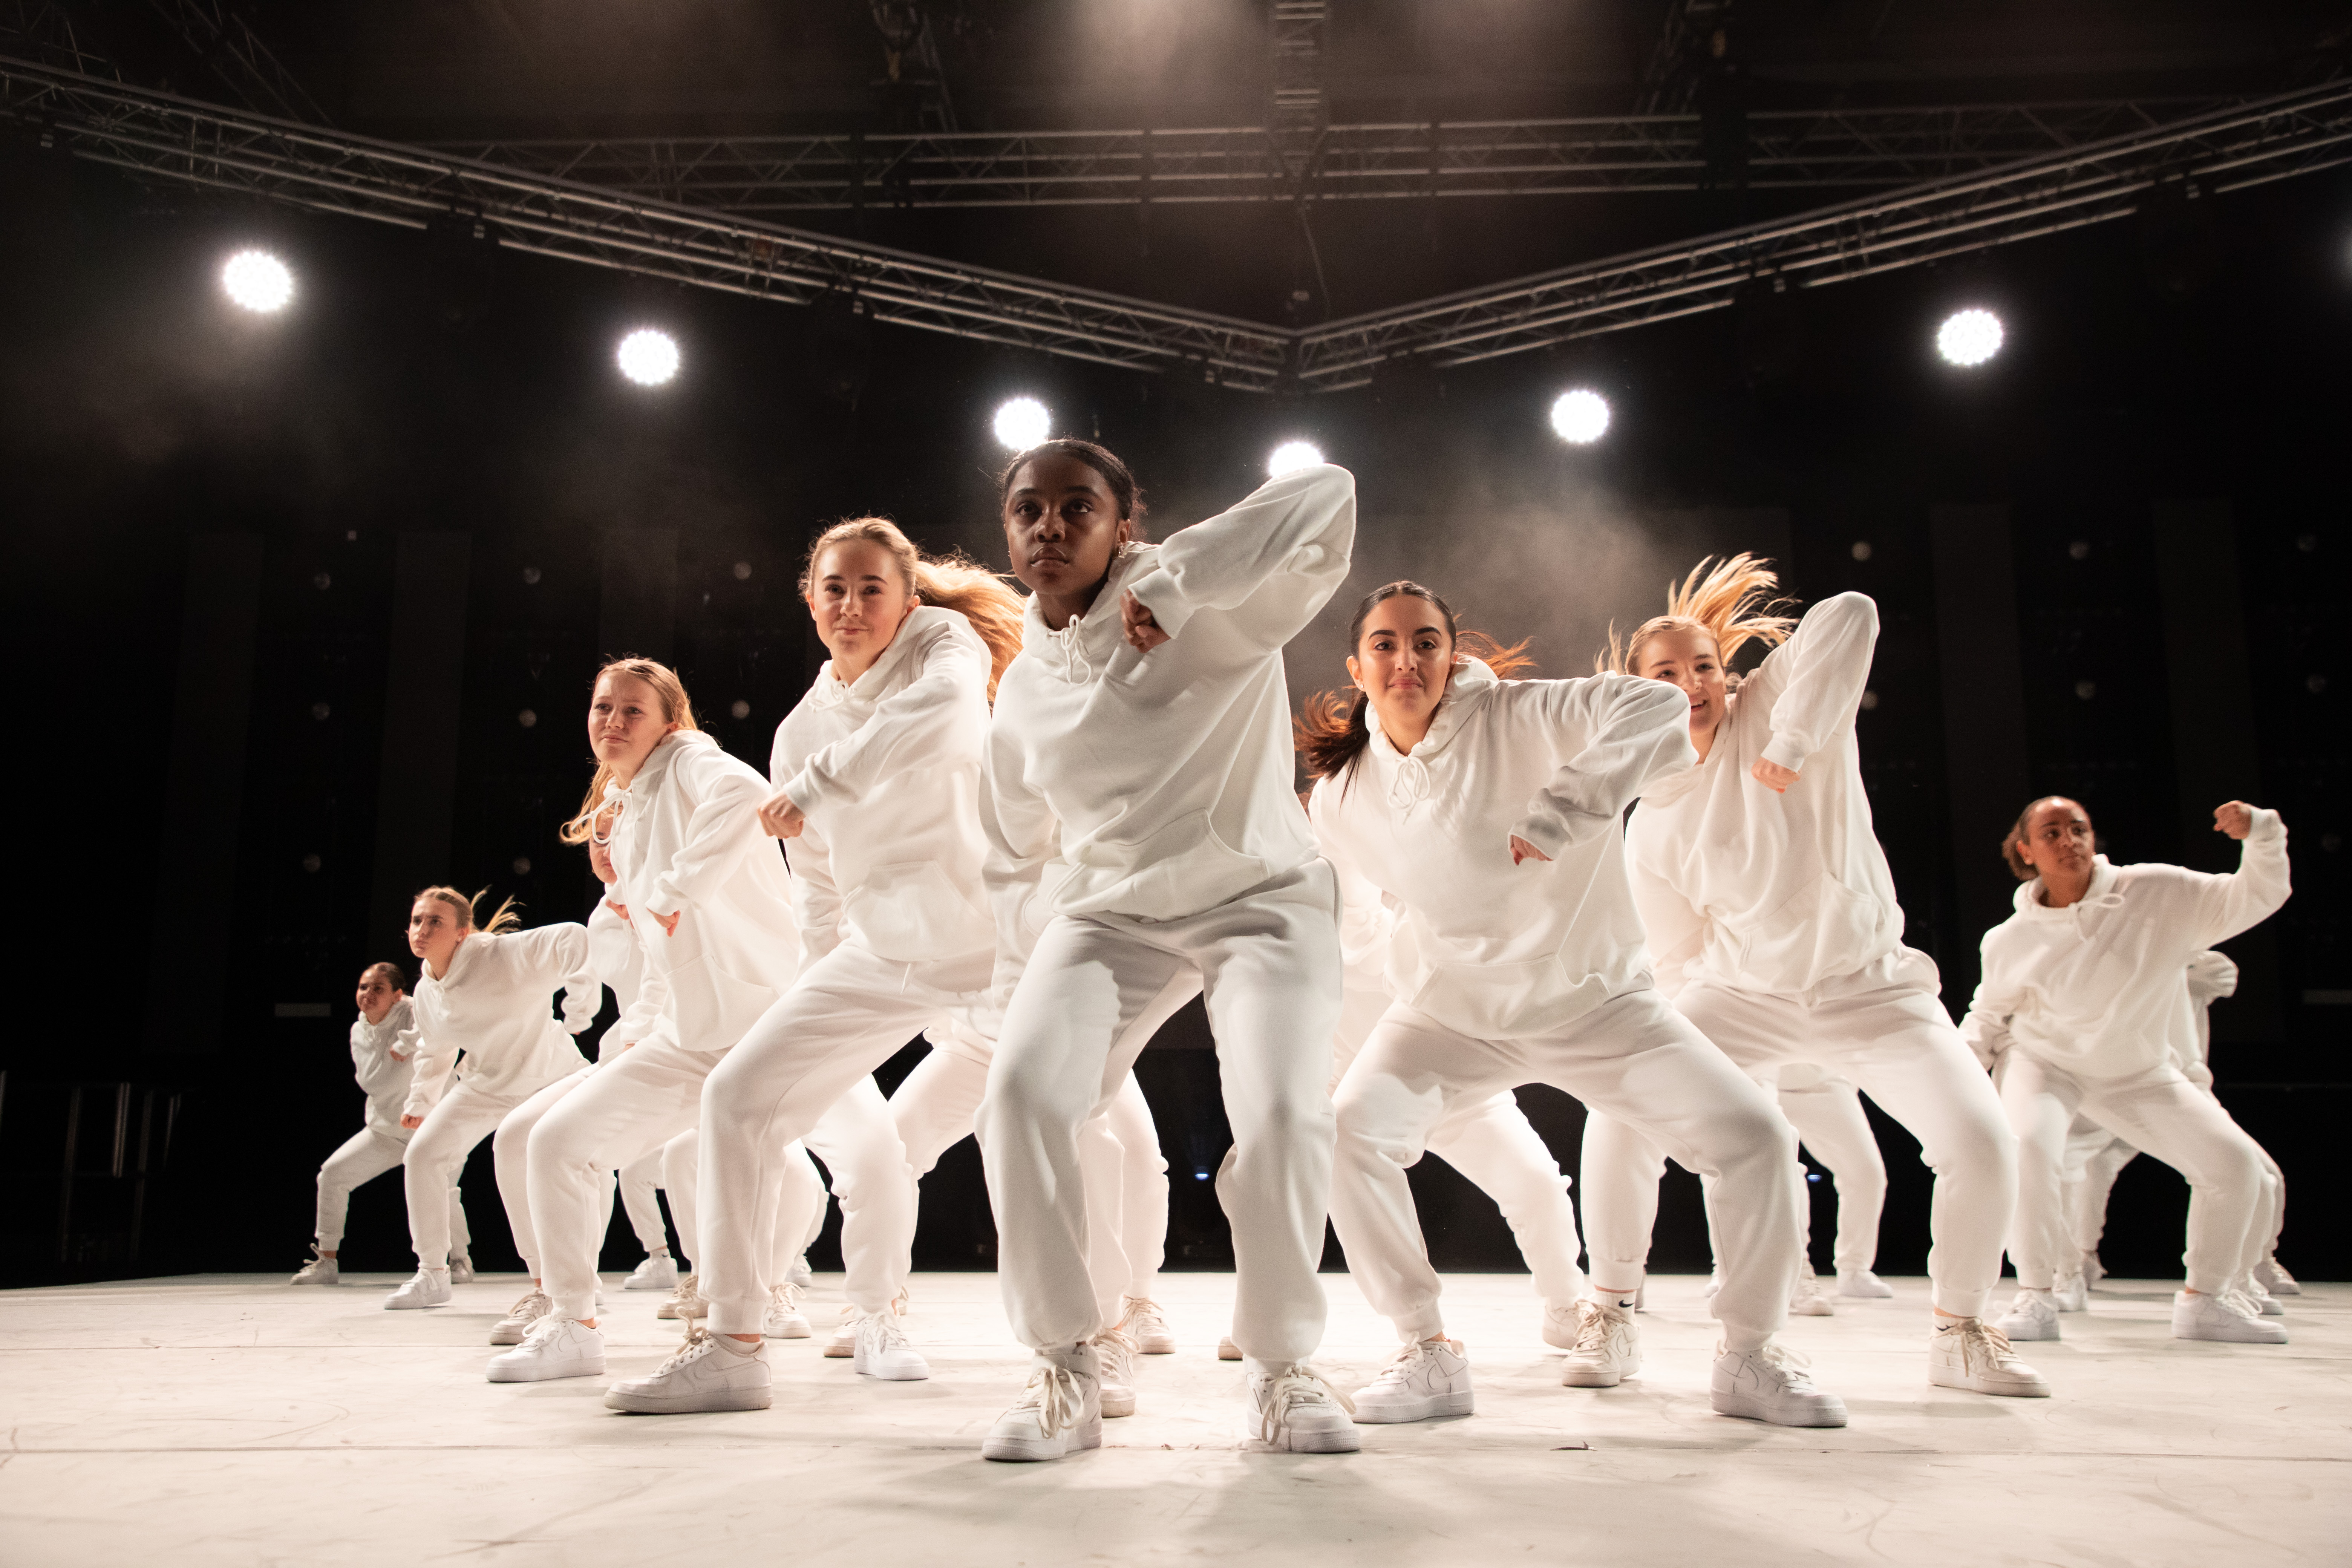 Dancers in white choreography